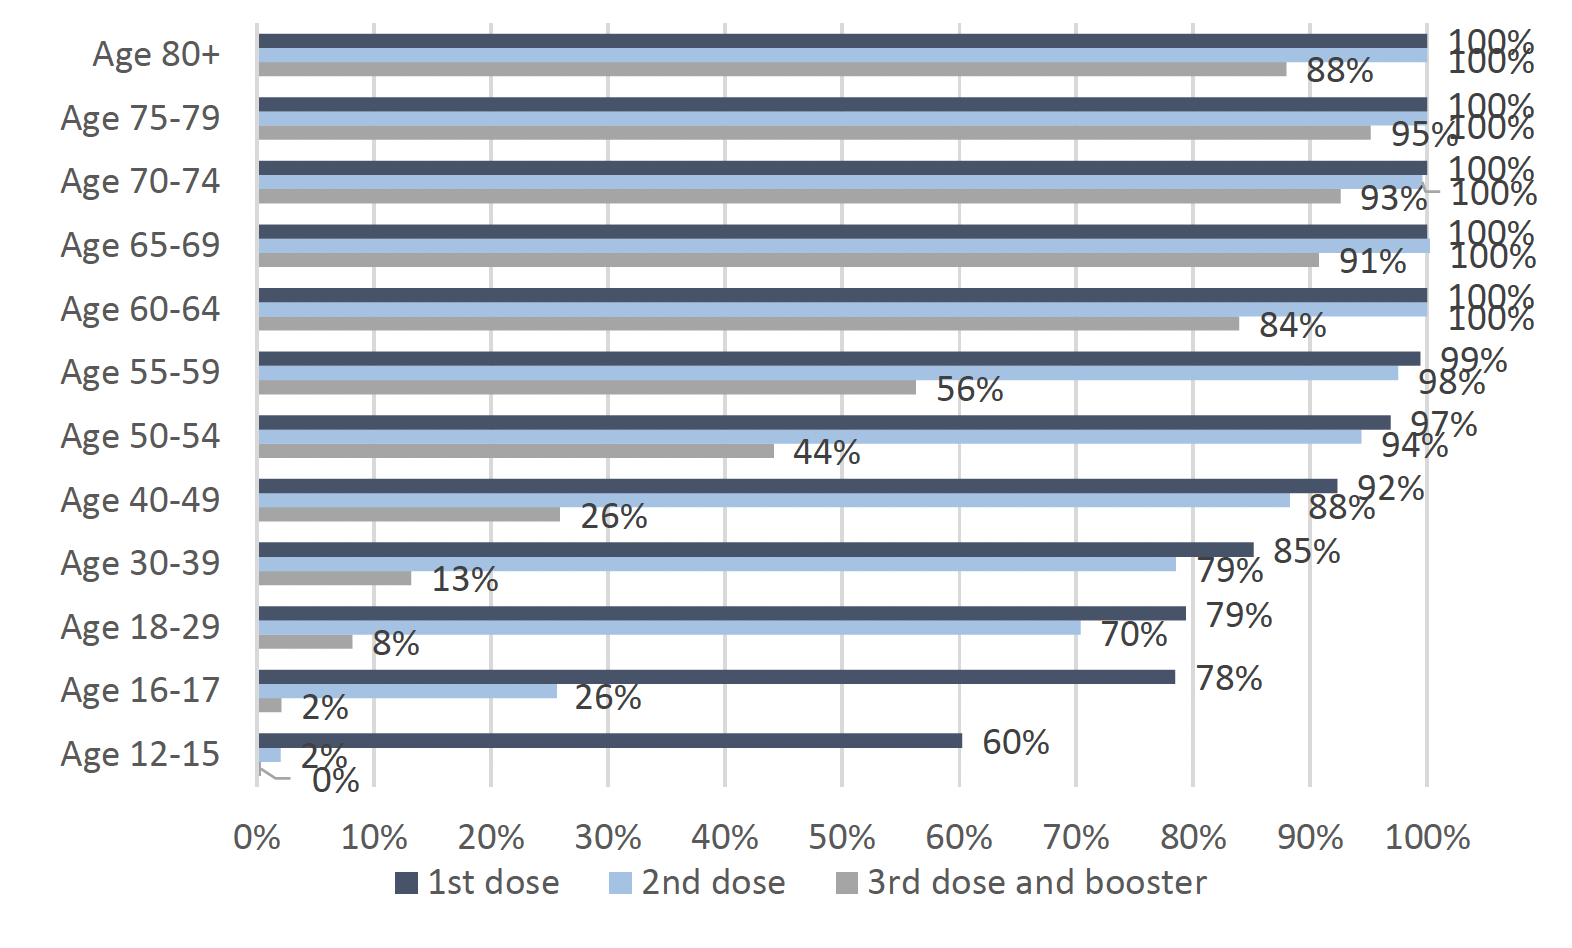 This bar chart shows the percentage of people that have received their first, second and third or booster dose of the Covid vaccine so far, for twelve age groups. The six groups aged over 50 have more than 97% of people vaccinated with the first dose and more than 94% of people vaccinated with the second dose. Of those aged 40-49, 92% have received their first dose and 88% have received their second dose. Younger age groups have lower percentages vaccinated, with 85% of 30-39 year olds having received their first dose and 79% the second dose, 79% of the 18-29 year olds having received their first and 70% having received their second dose, 78% of 16 to 17 year olds having received the first dose and 26% having received the second dose, 60% of the 12-15 year olds having received their first dose and 2% their second dose, and 59% of 12-15 year olds having received their first dose and 2% having received their second dose of the vaccine. The third dose or booster vaccine is showing at 88% for those aged 80 and over, 95% for those aged 75-79, 93% for those aged 70-74, 91% for those aged 65-69, 84% for those aged 60-64, 56% for those aged 55-59, and 44% and under for younger age groups. 